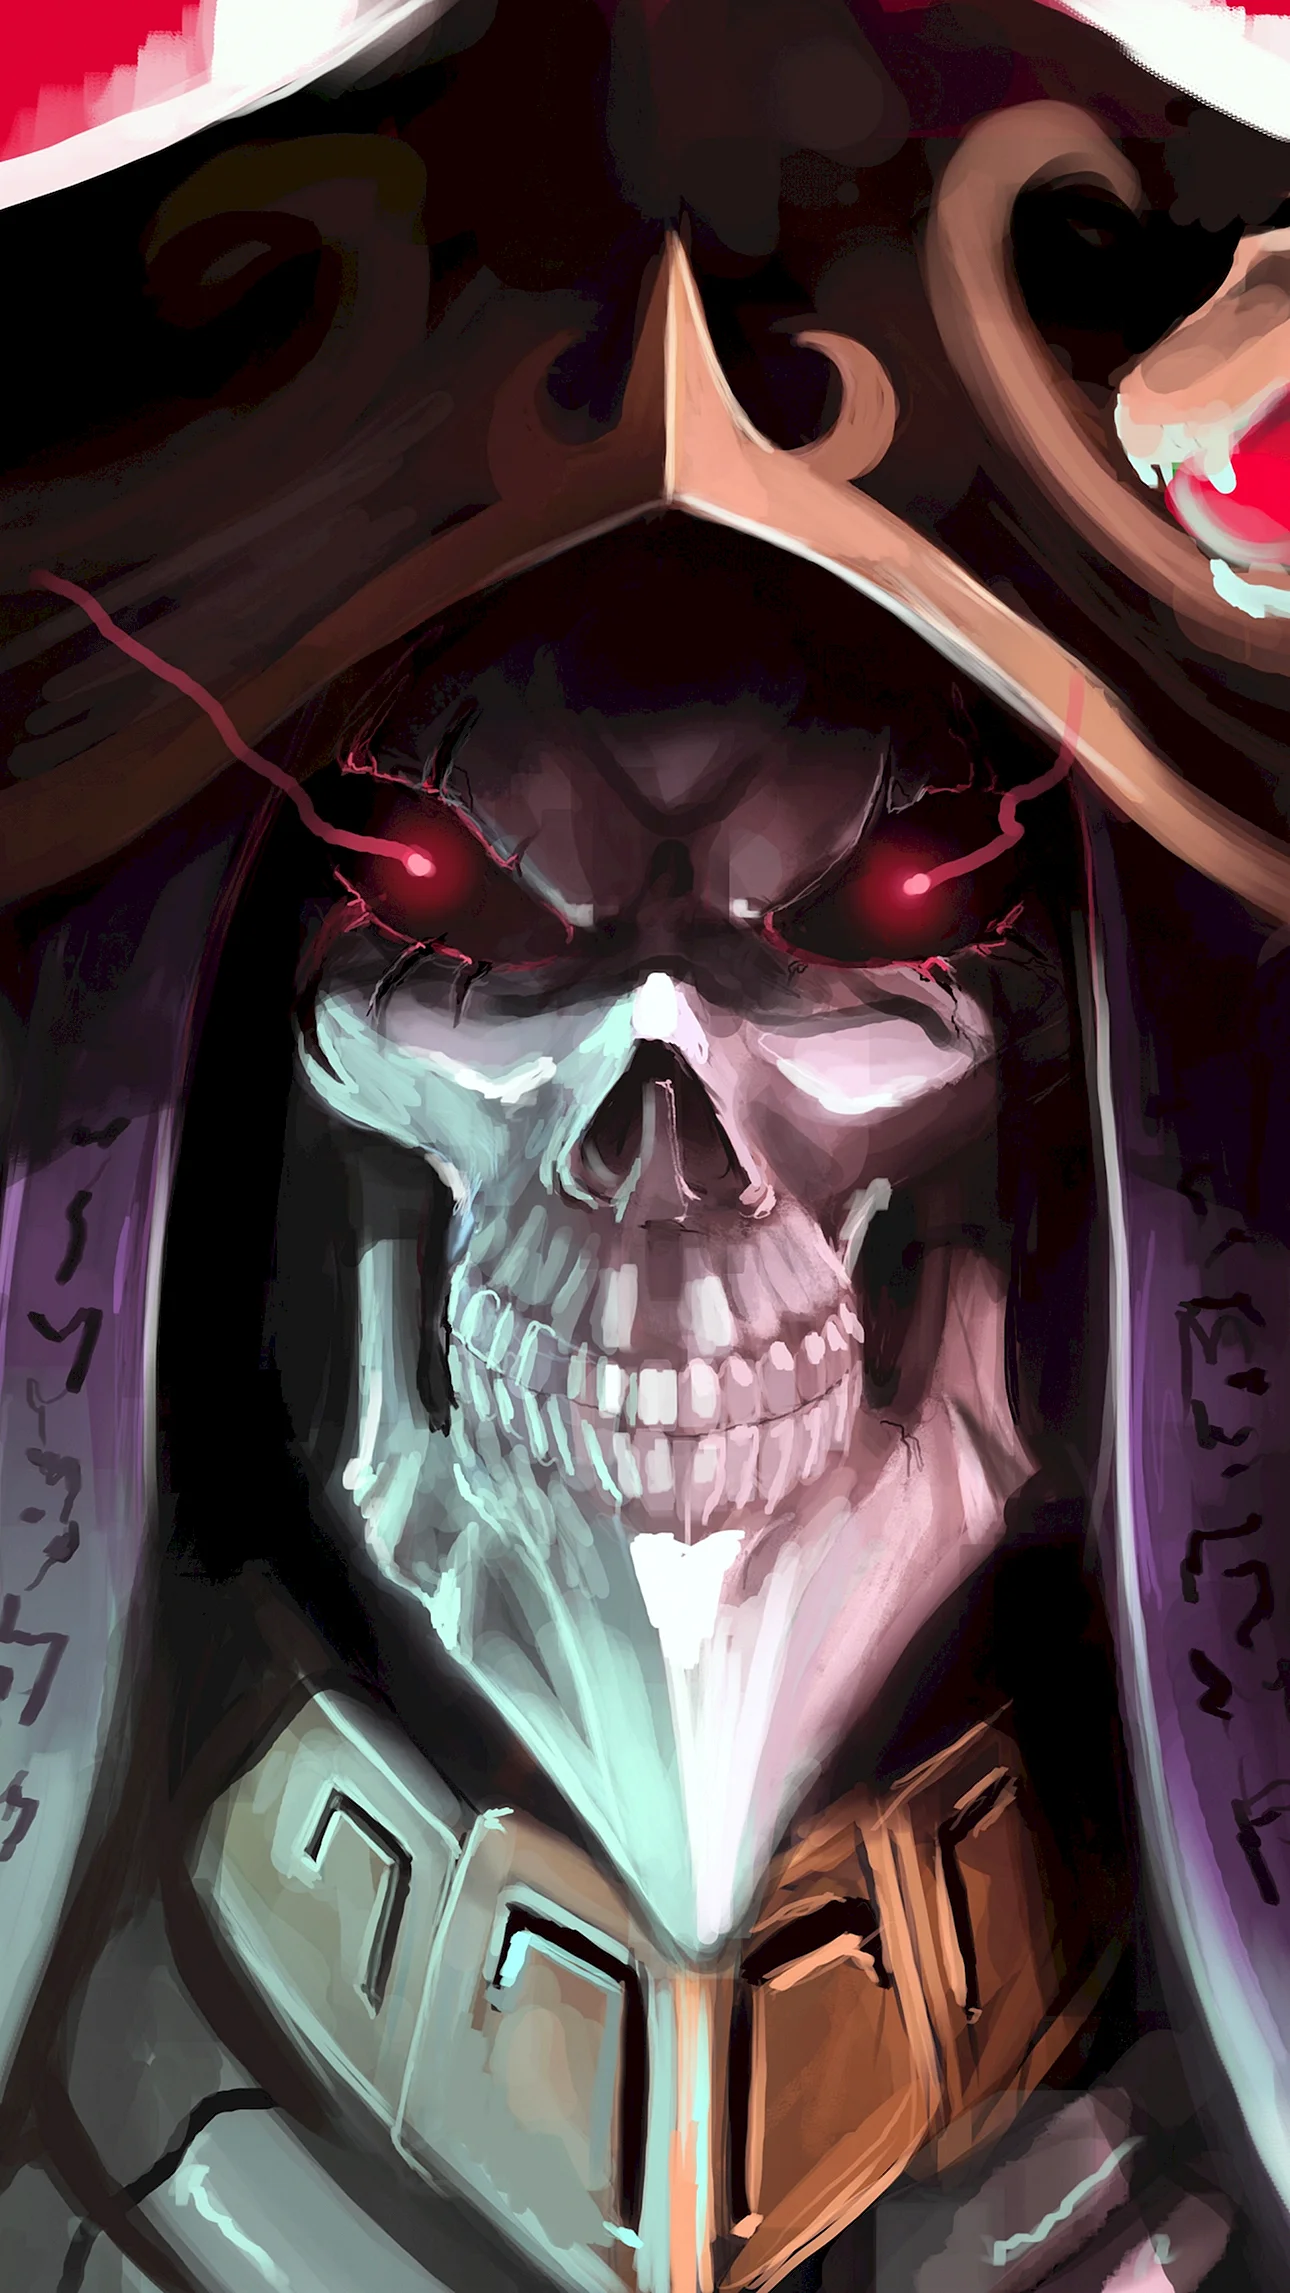 Wajah Ainz Overlord Wallpaper For iPhone